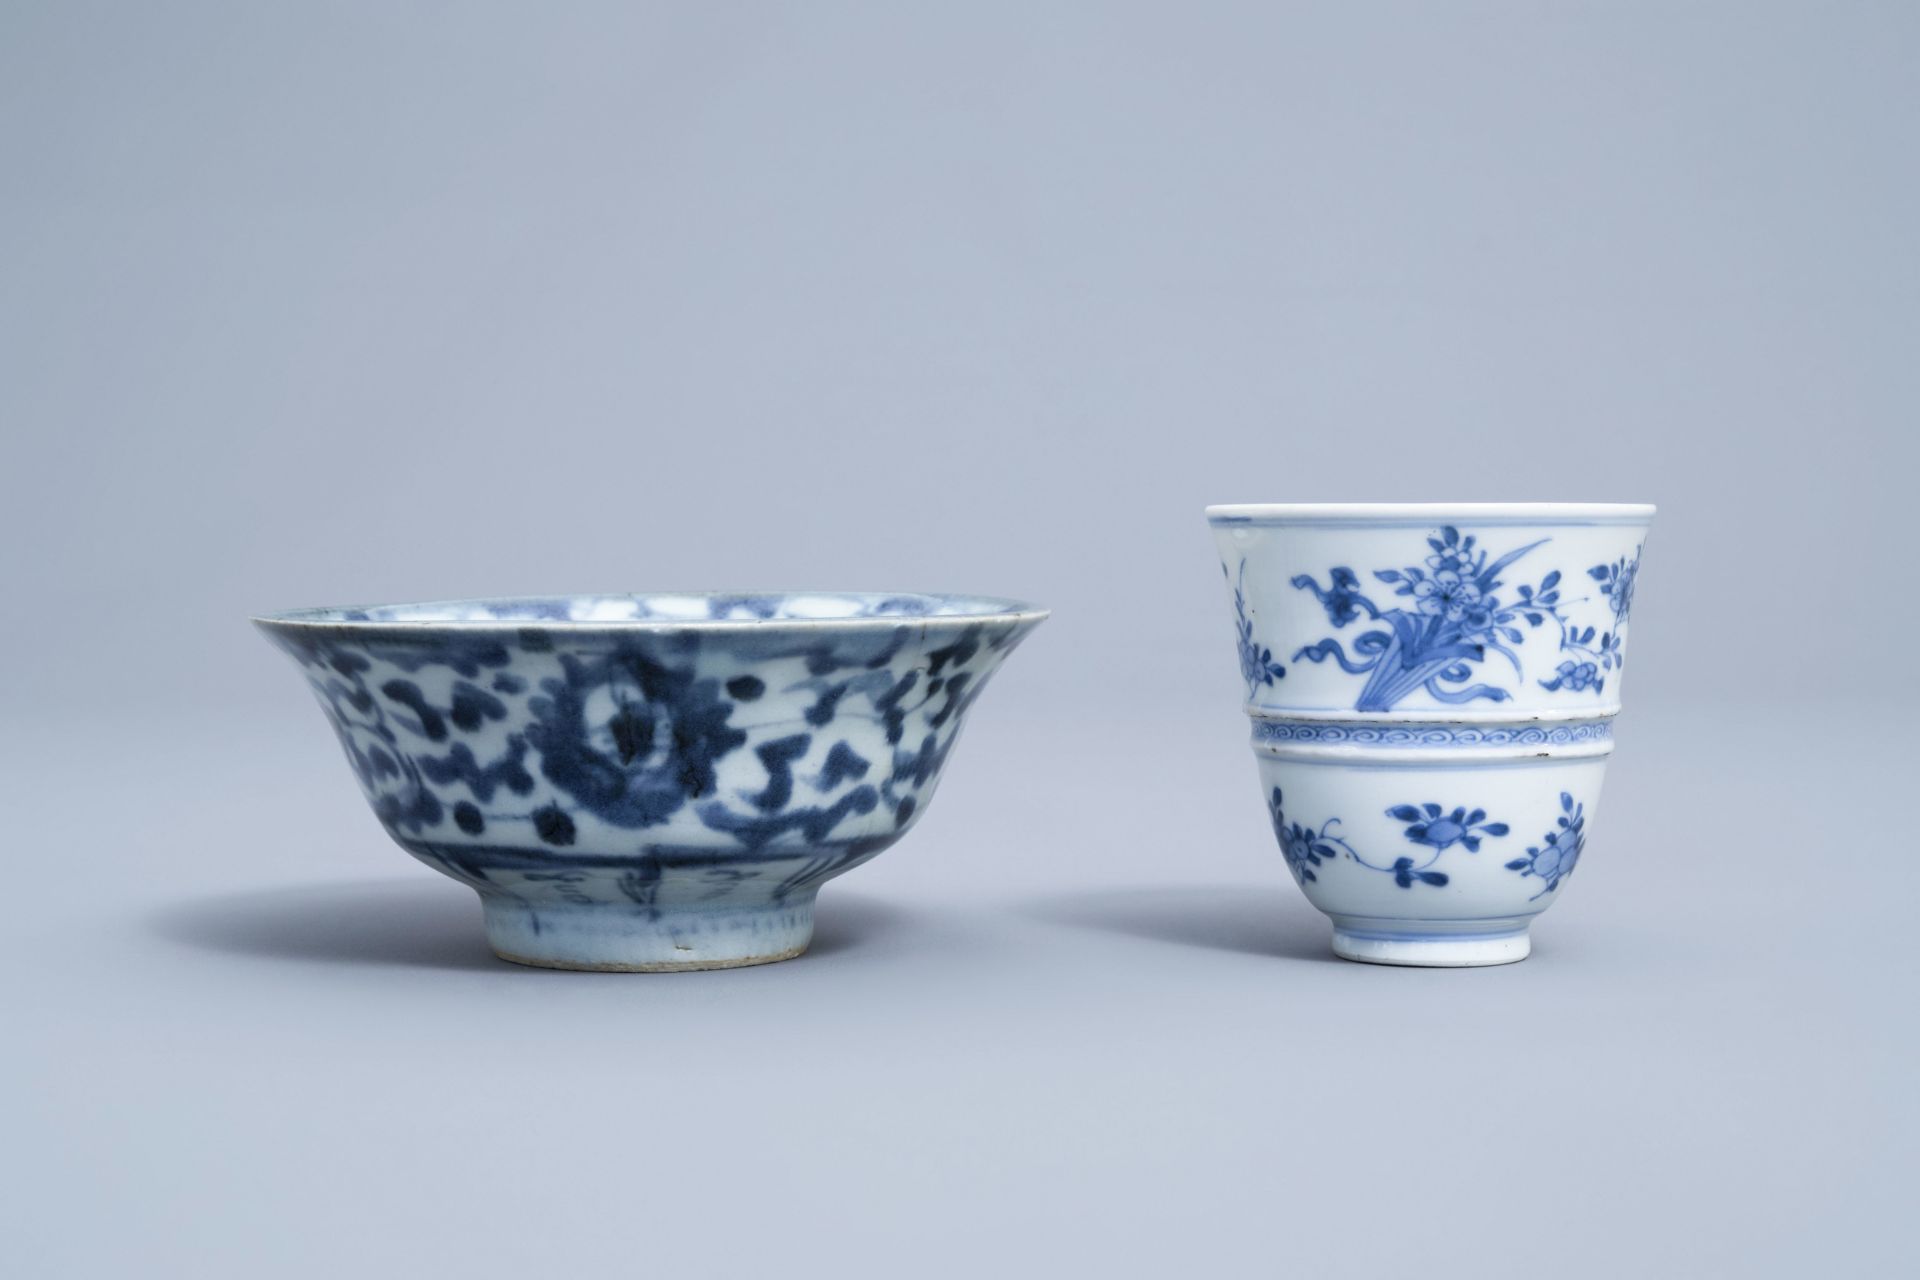 A varied collection of Chinese blue and white porcelain, 18th C. and later - Image 23 of 54